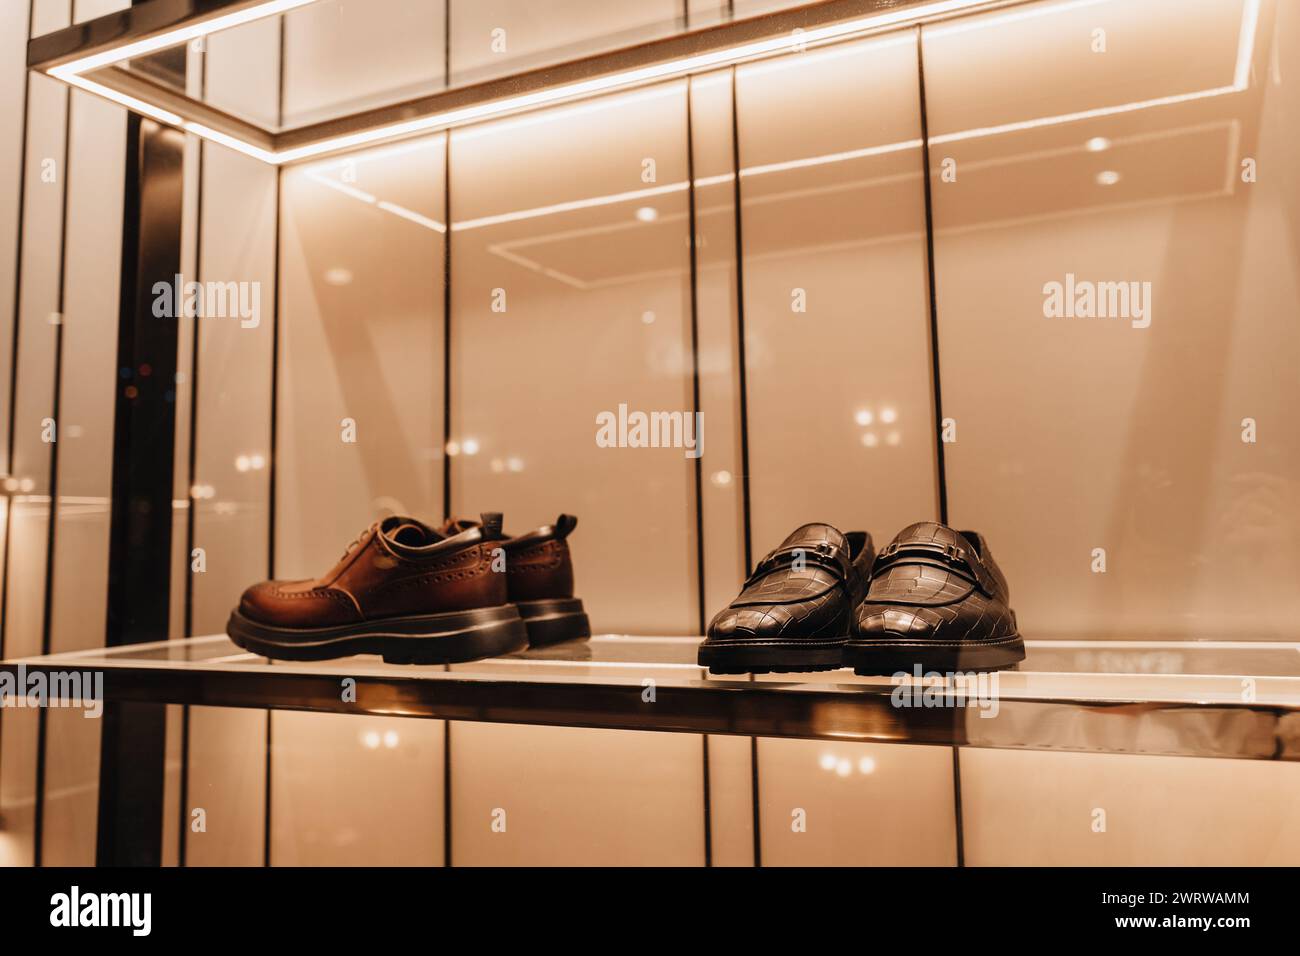 Men's stylish leather shoes on display in a luxury boutique Stock Photo